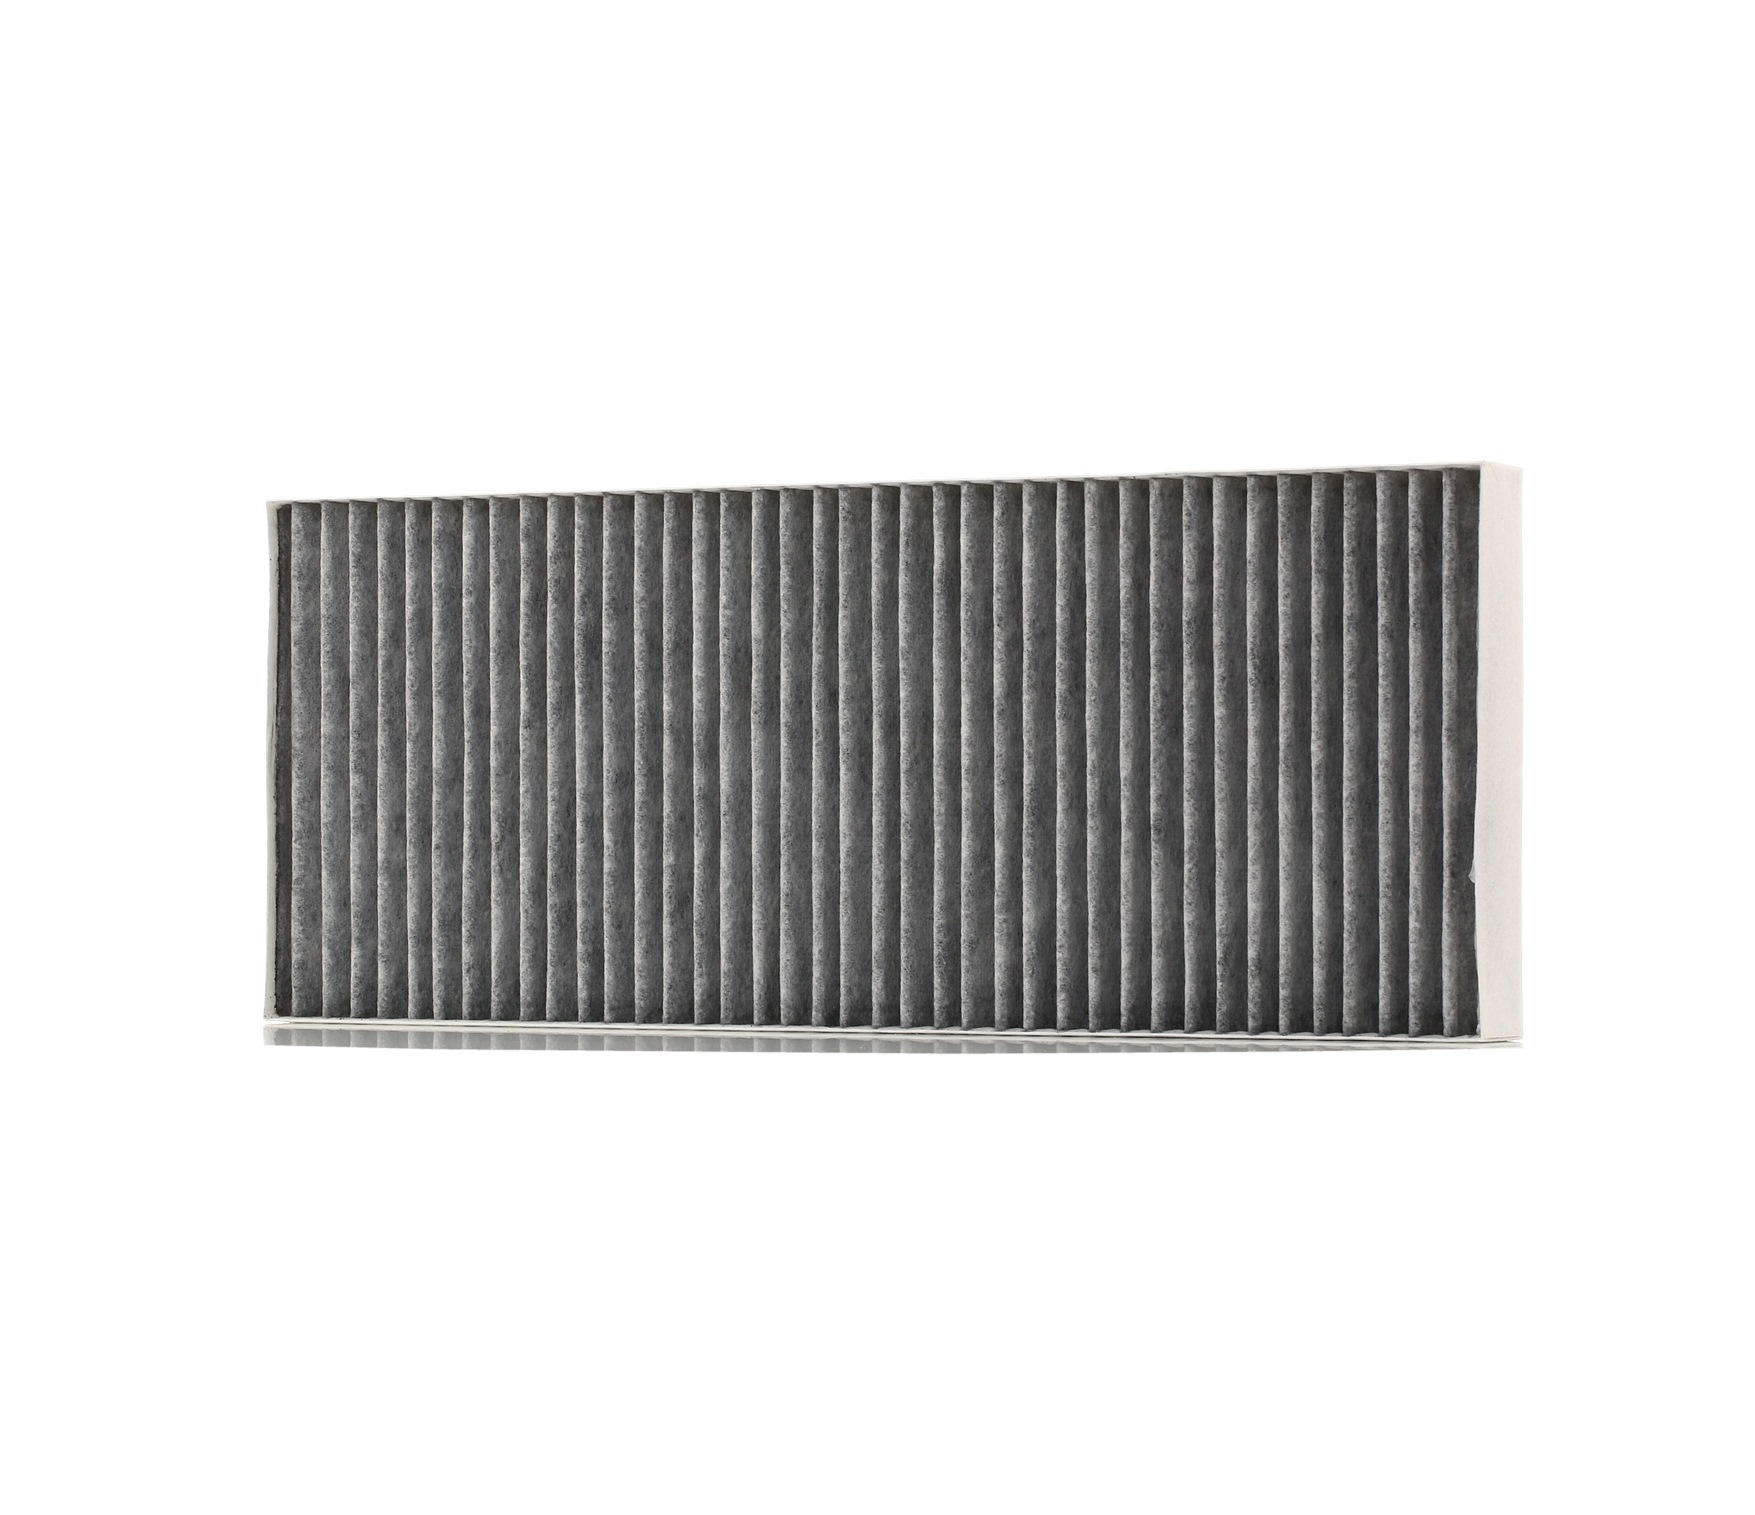 70325643 MAHLE ORIGINAL Activated Carbon Filter, 405,0 mm x 164 mm x 33,0 mm Width: 164mm, Height: 33,0mm, Length: 405,0mm Cabin filter LAK 167 buy